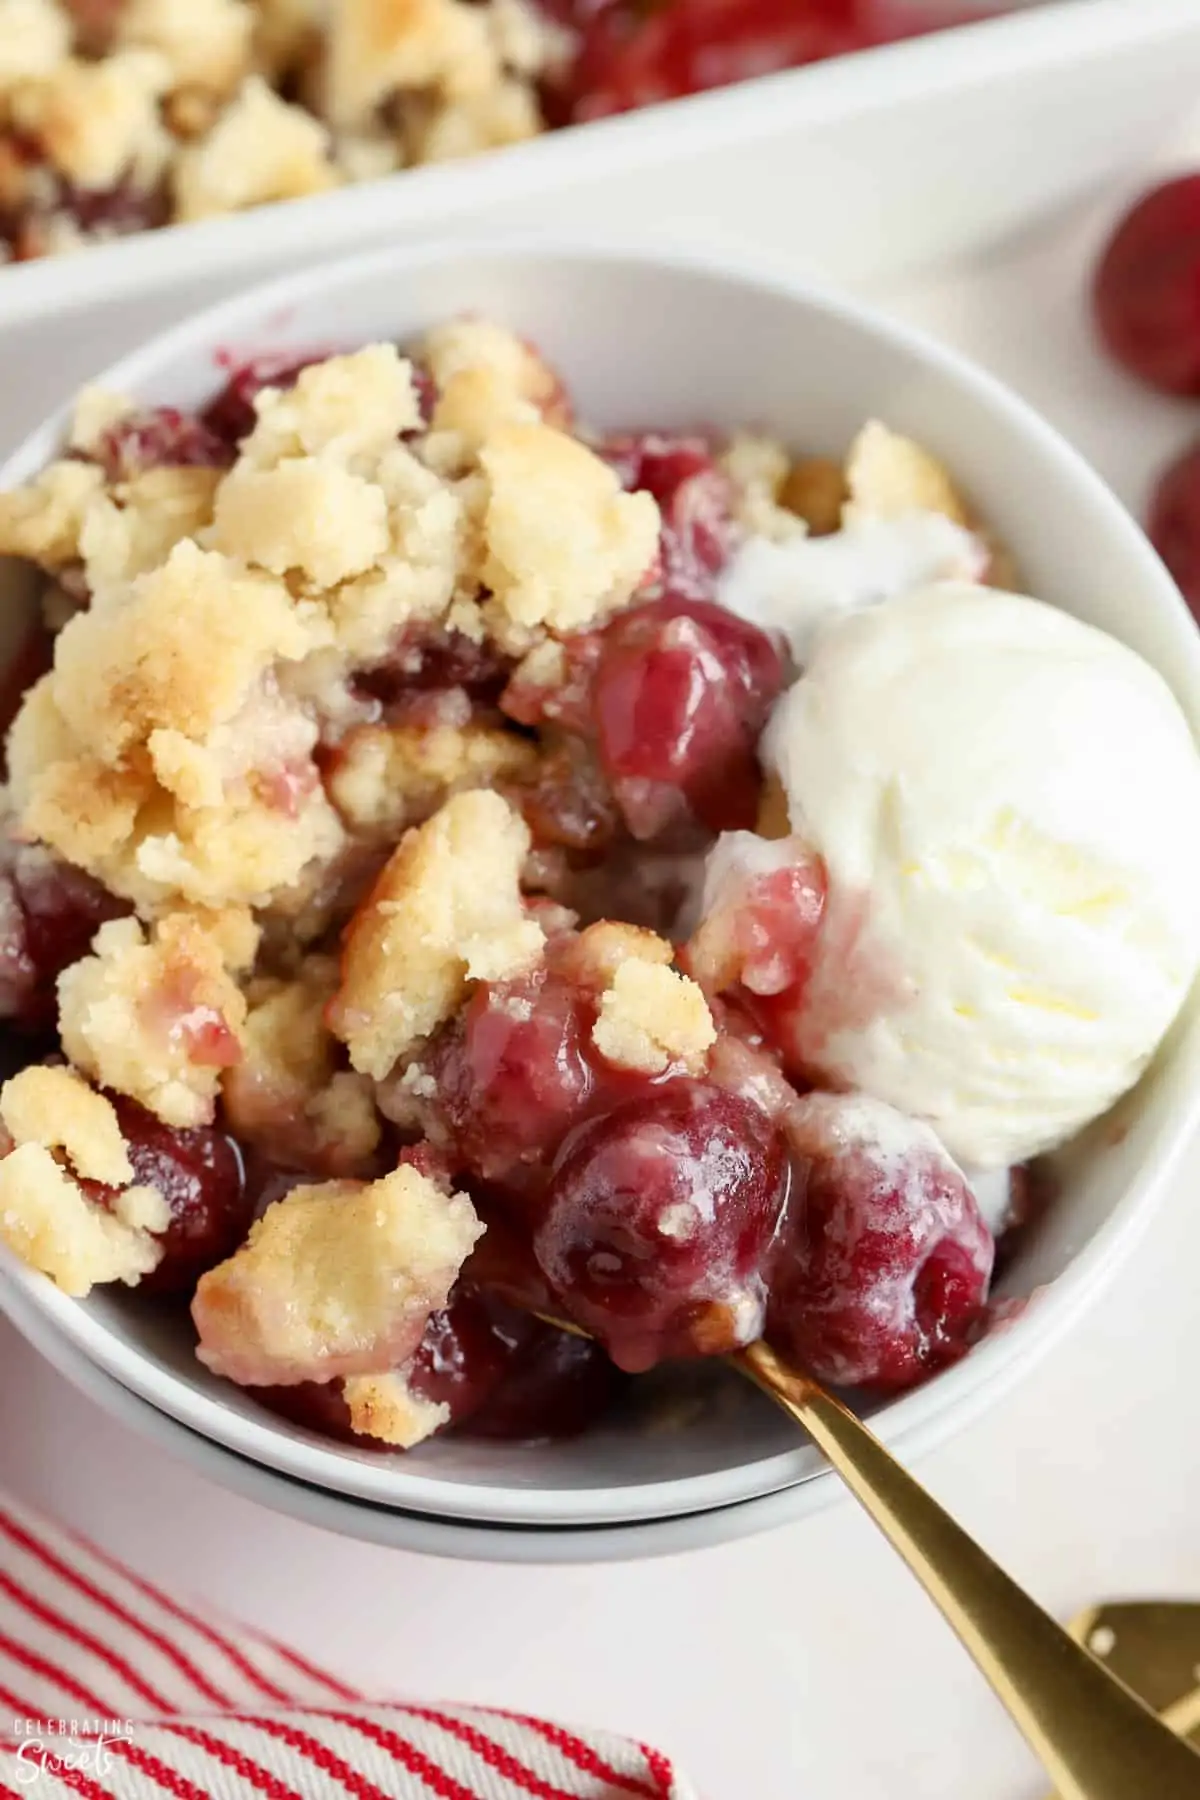 Cherry cobbler in a white bowl topped with vanilla ice cream.